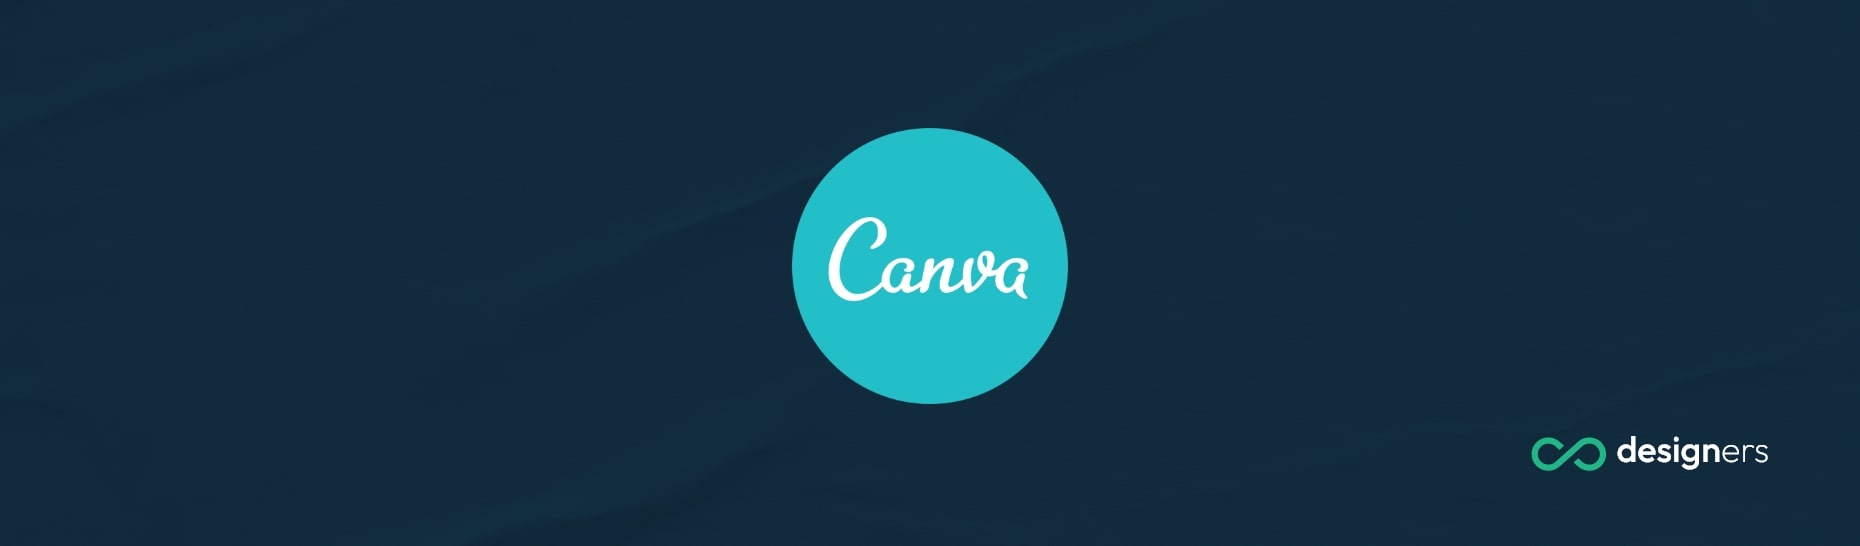 How Do I Crop a Circle Shape in Canva?